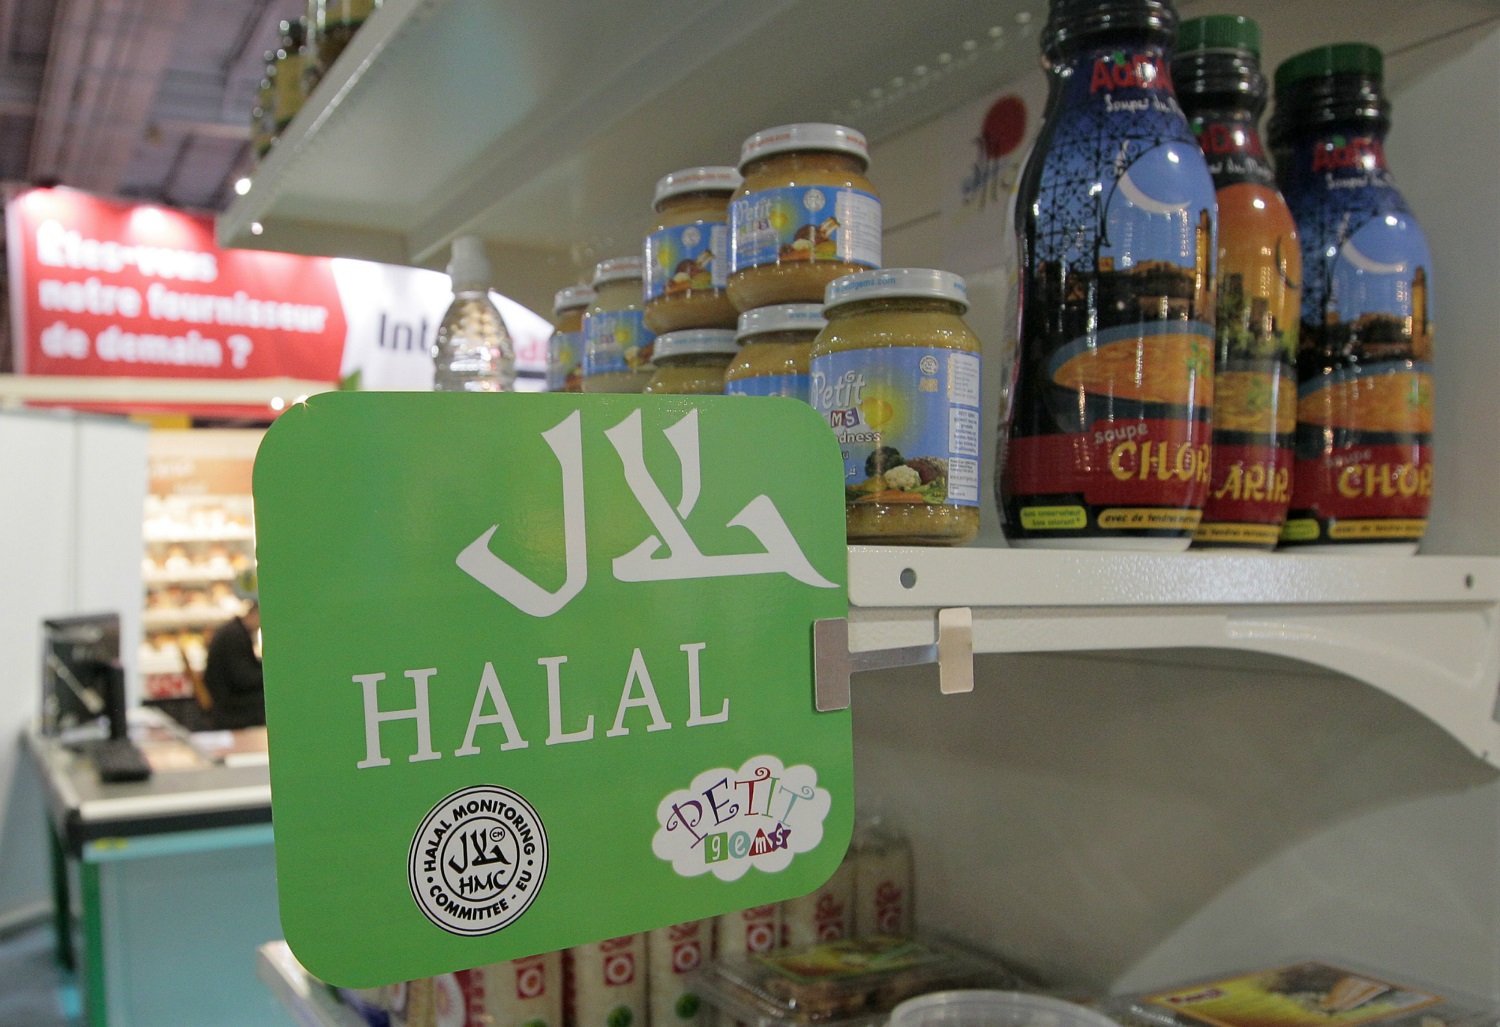 Halal food products have become a staple of supermarket shelves around the world (AFP)